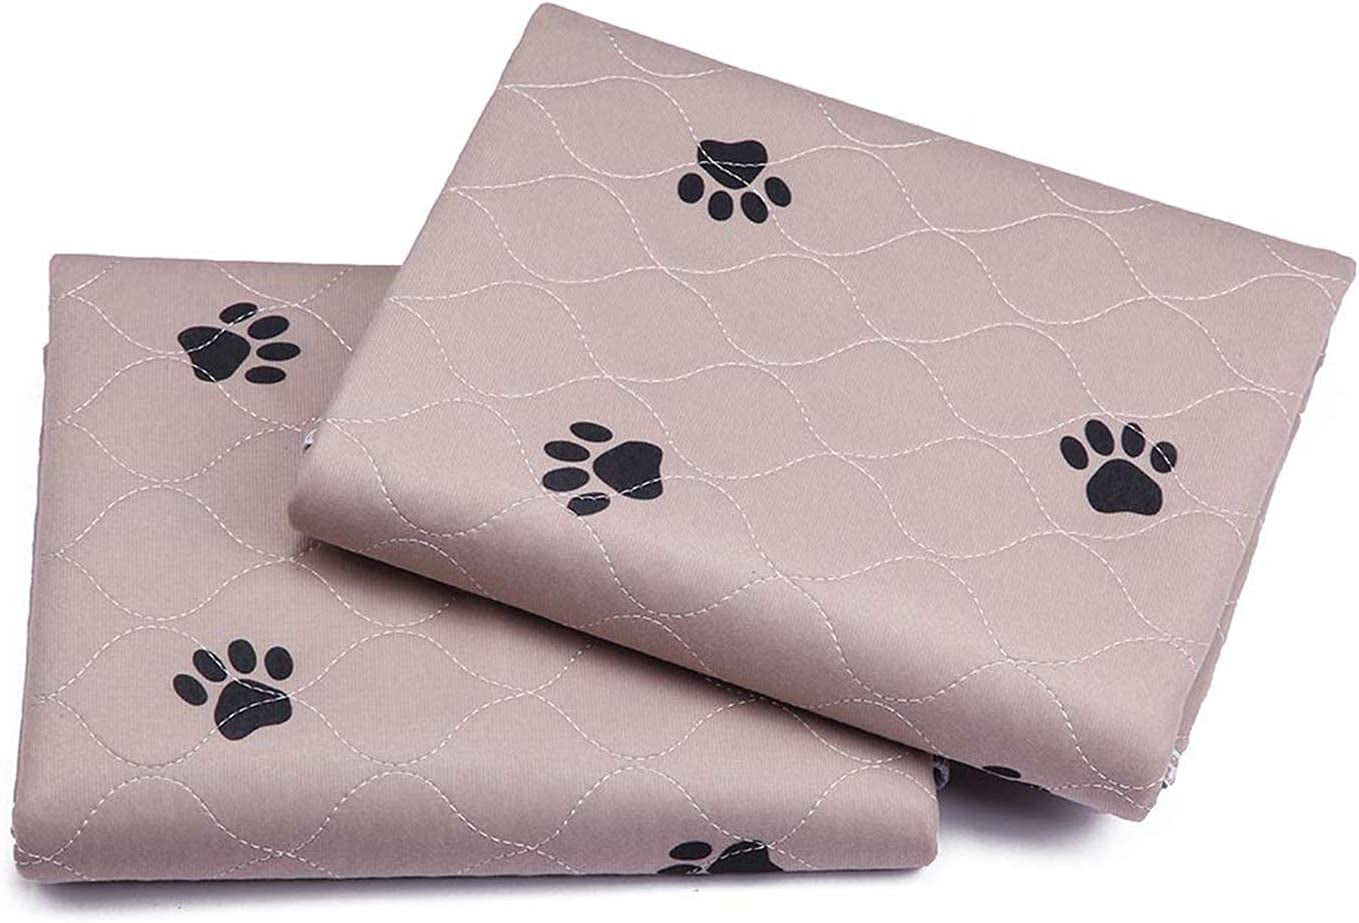 Washable Dog Pee Pads with Puppy Grooming Gloves,Puppy Pads,Reusable Pet Training Pads,Large ,Waterproof Pet Pads for Dog Bed Mat,Super Absorbing Whelping Pads,41X41 Inch (Pack of 2)